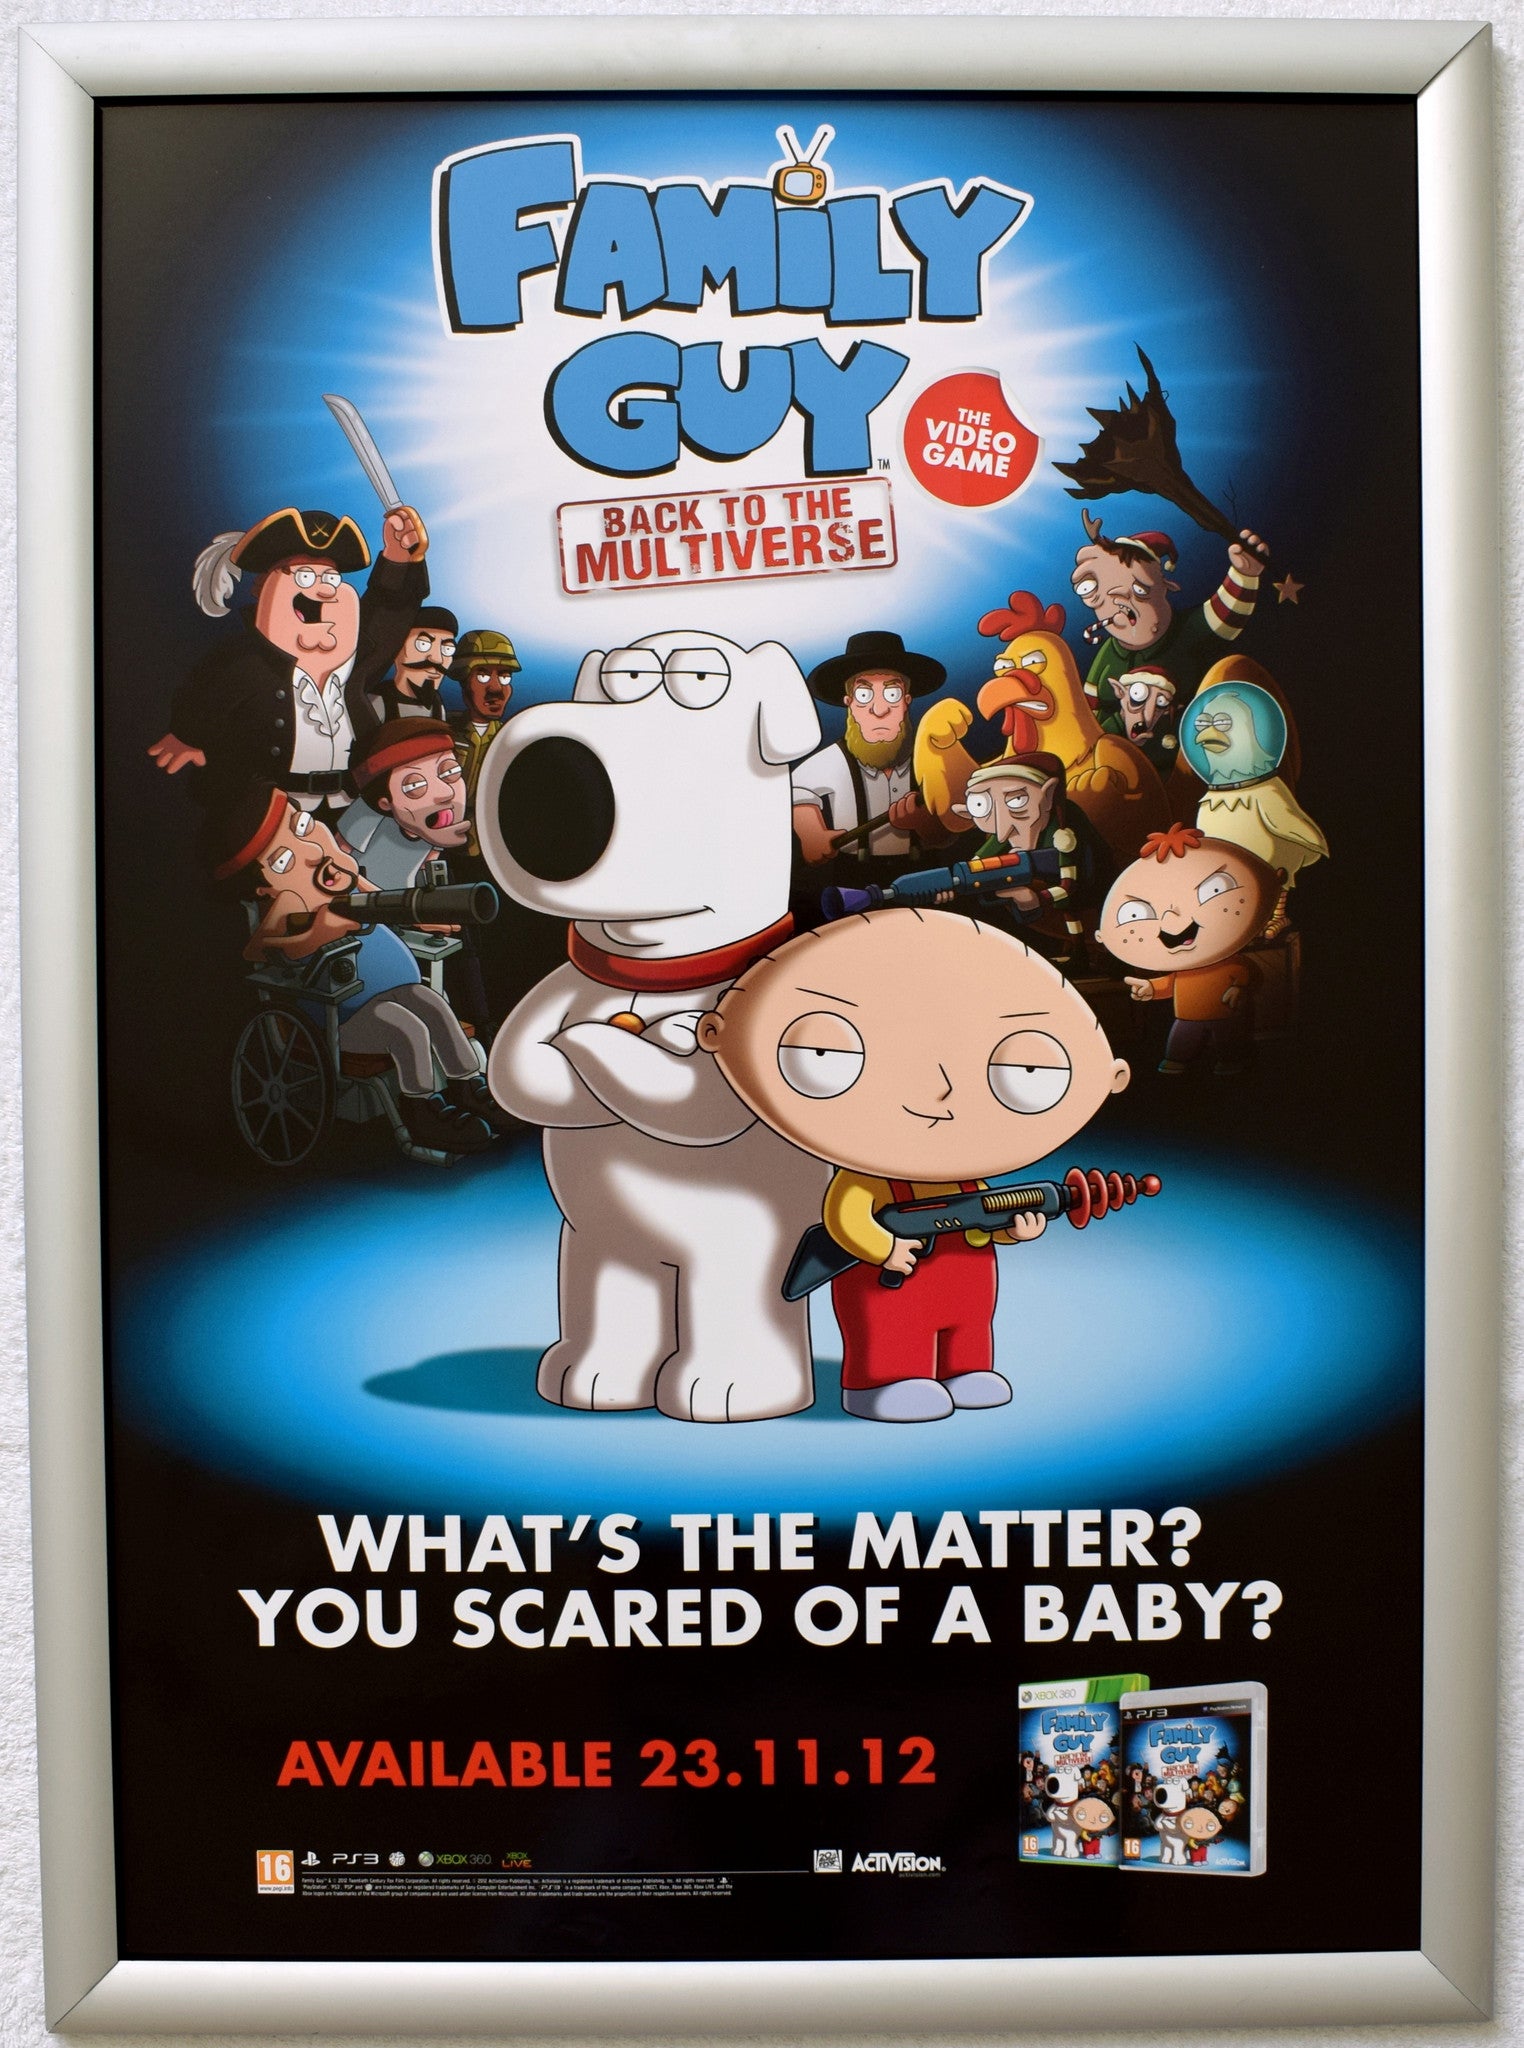 Family Guy Back to the Multiverse (A2) Promotional Poster #2